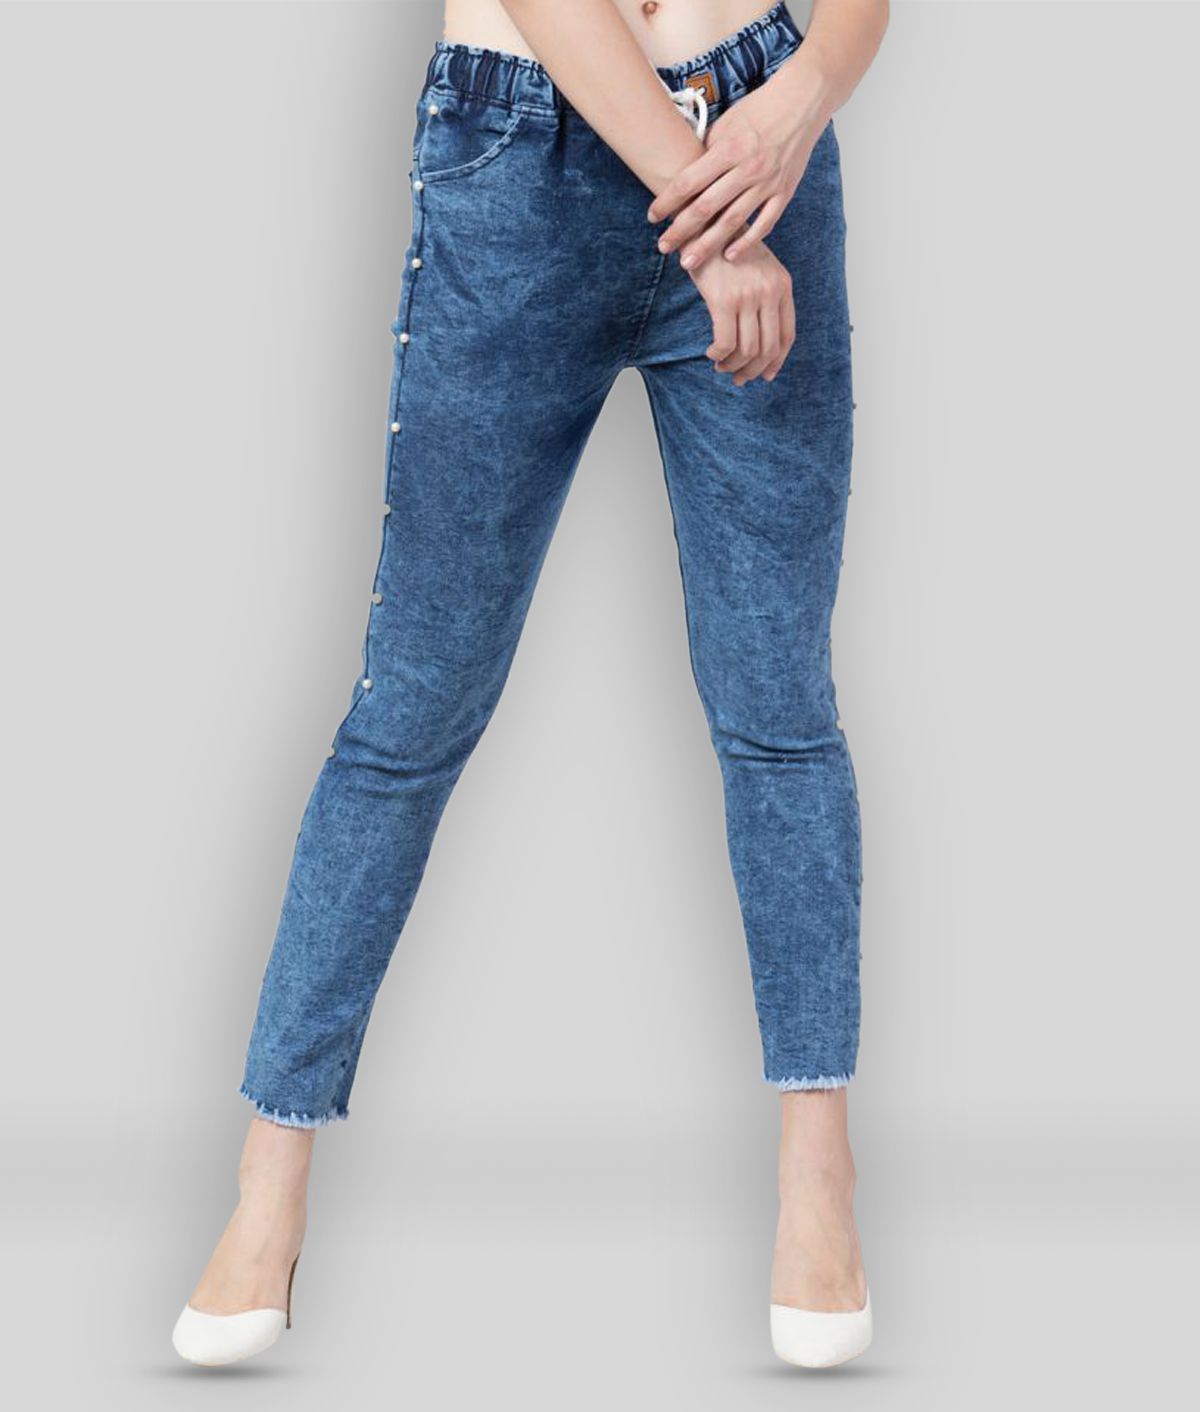 Buy Ira Premium Collections - Blue Denim Women's Jeans ( Pack of 1 ...